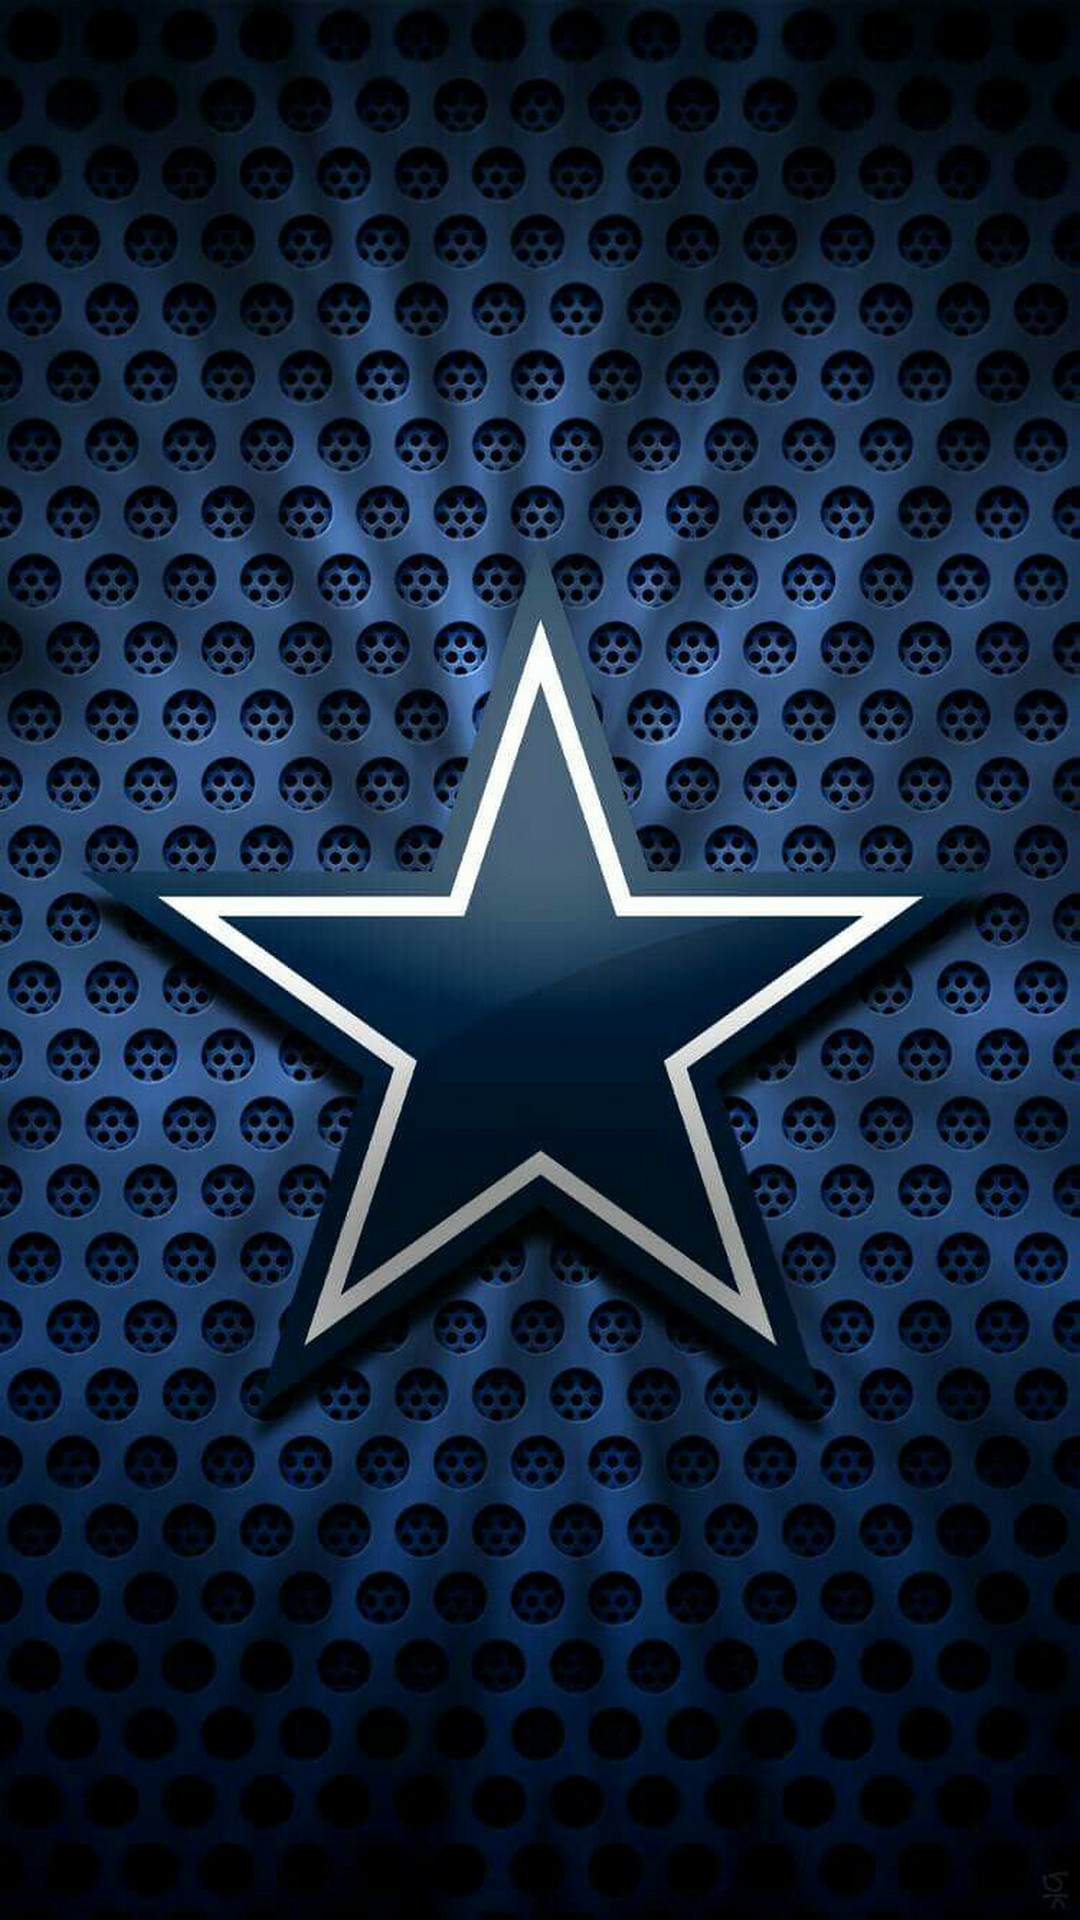 Dallas Cowboys iPhone XR Wallpaper with high-resolution 1080x1920 pixel. Download and set as wallpaper for Apple iPhone X, XS Max, XR, 8, 7, 6, SE, iPad, Android